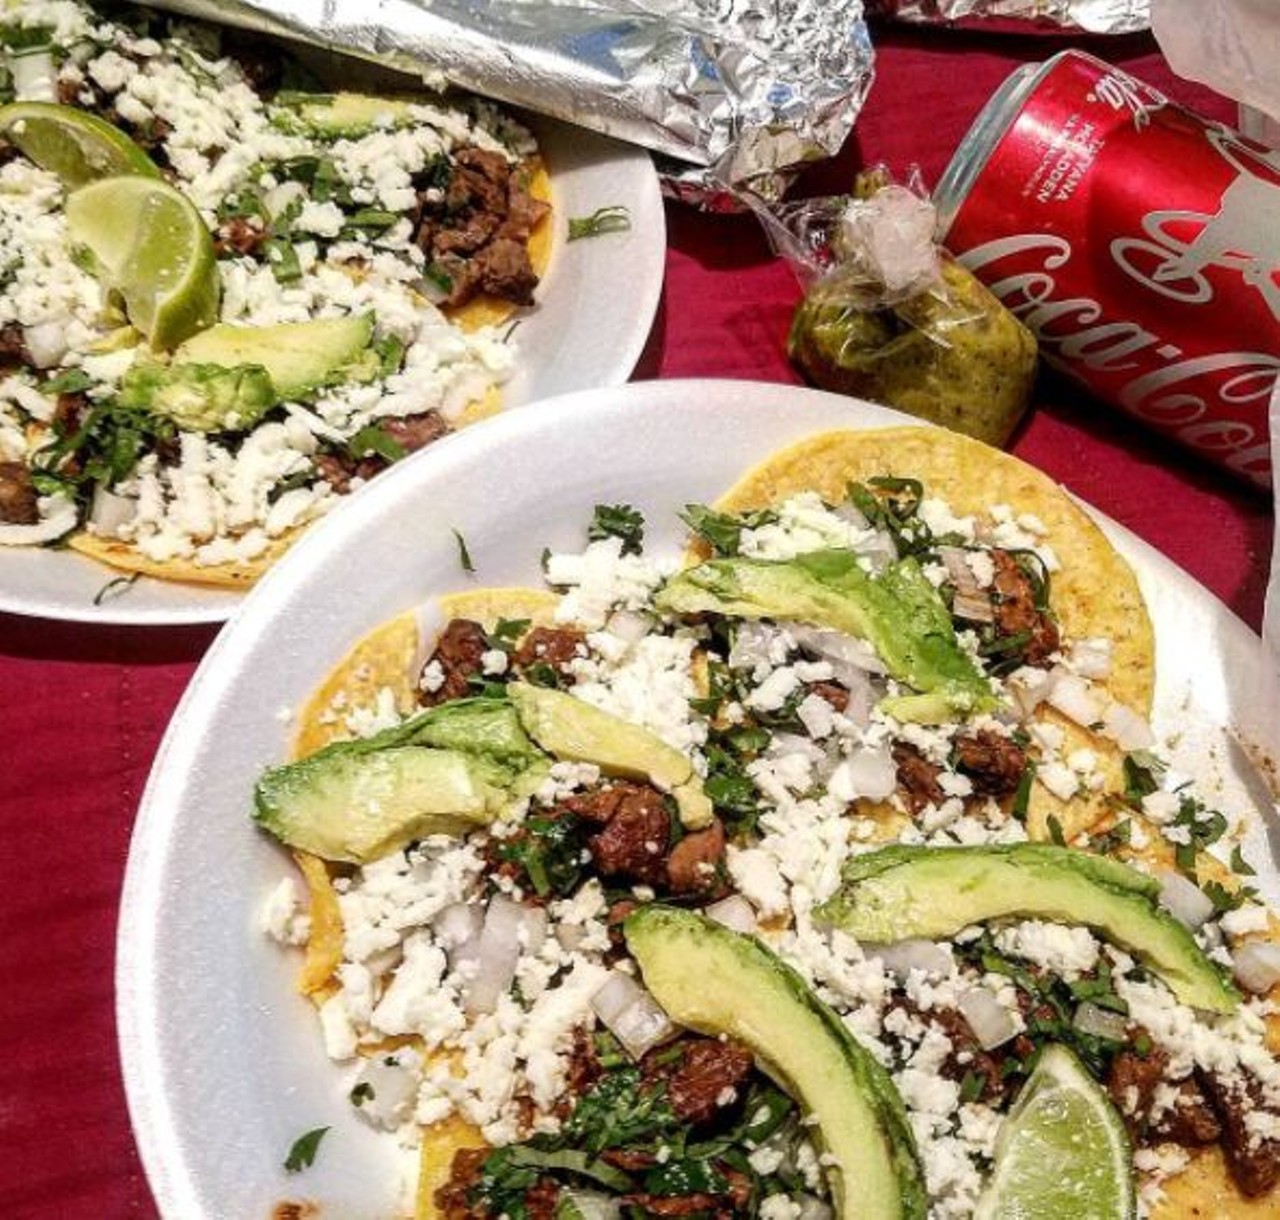 Tacos El Regio
2726 N St. Mary's St., (210) 590-8817
Get trashy at Faust Tavern or have a more dignified drink at Limelight, just be sure to make your way to this prized taco truck by the end of the night.
Photo via Instagram, celereyncarrots